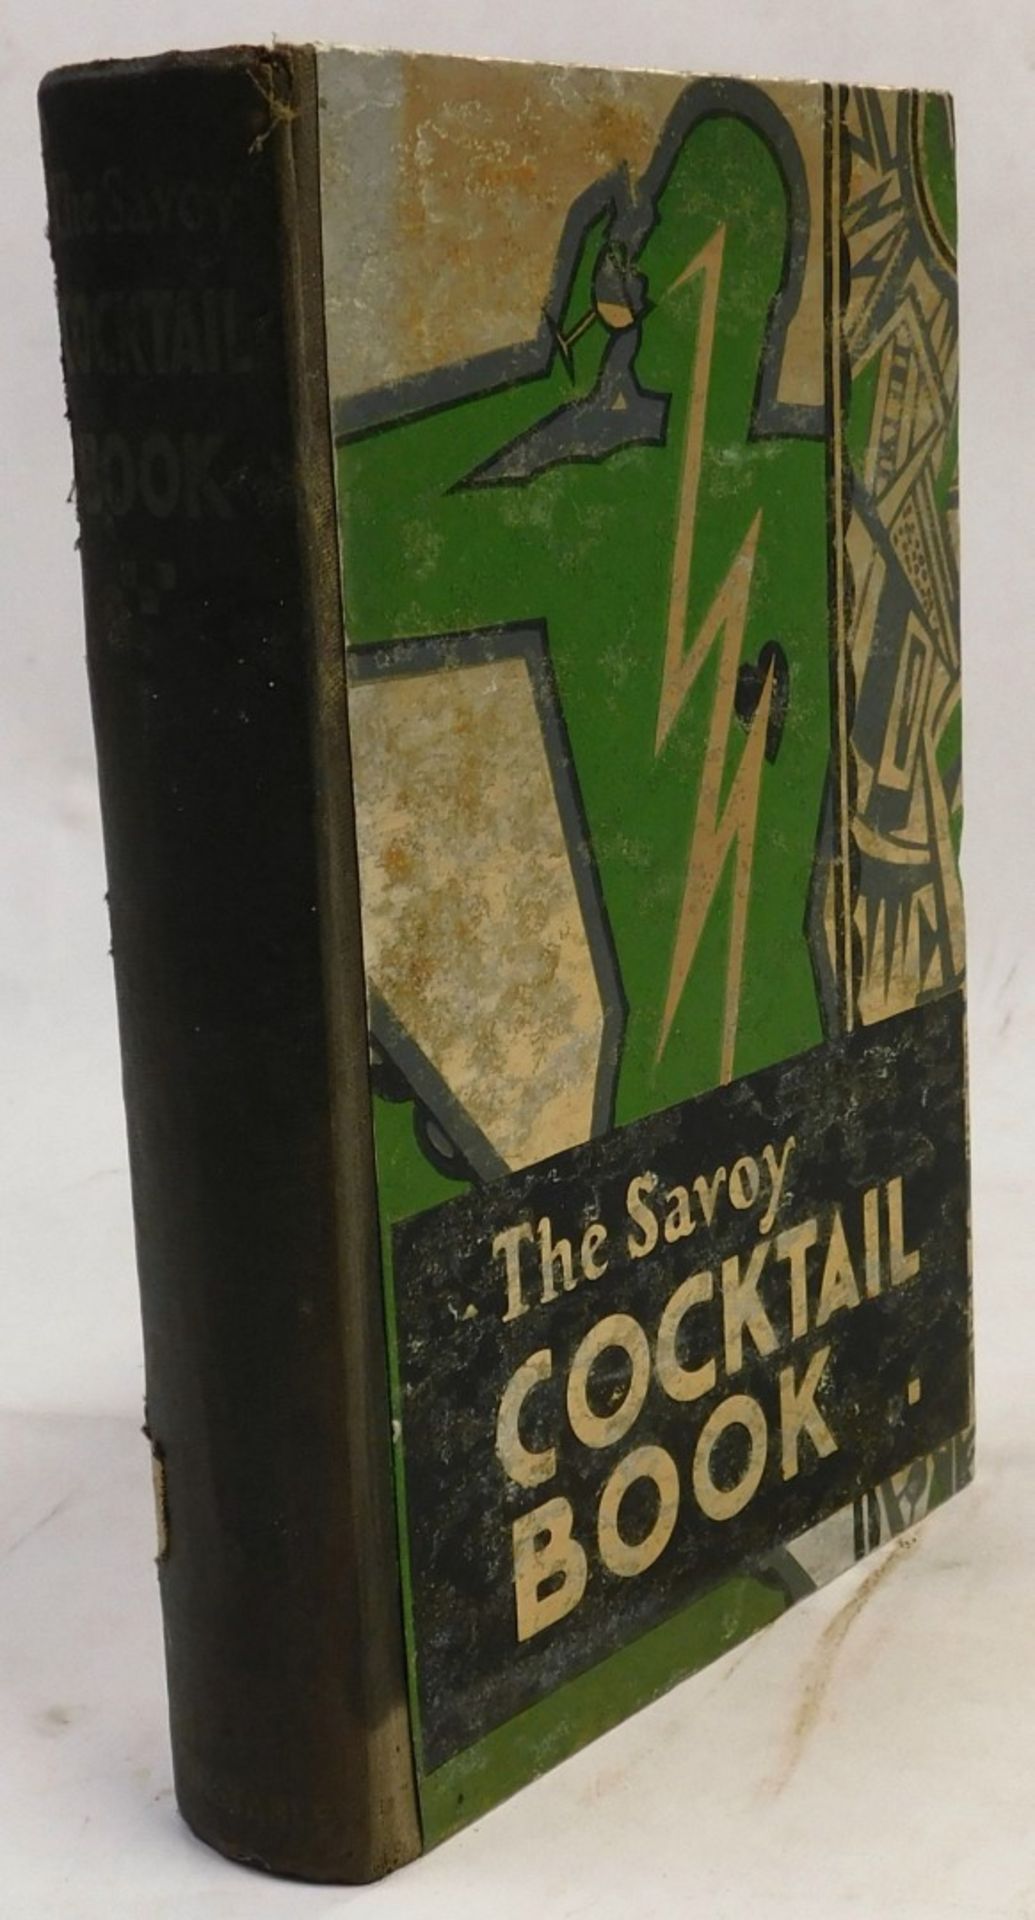 Withdrawn pre sale by Vendor - Craddock (Harry). The Savoy Cocktail Book, London Constable